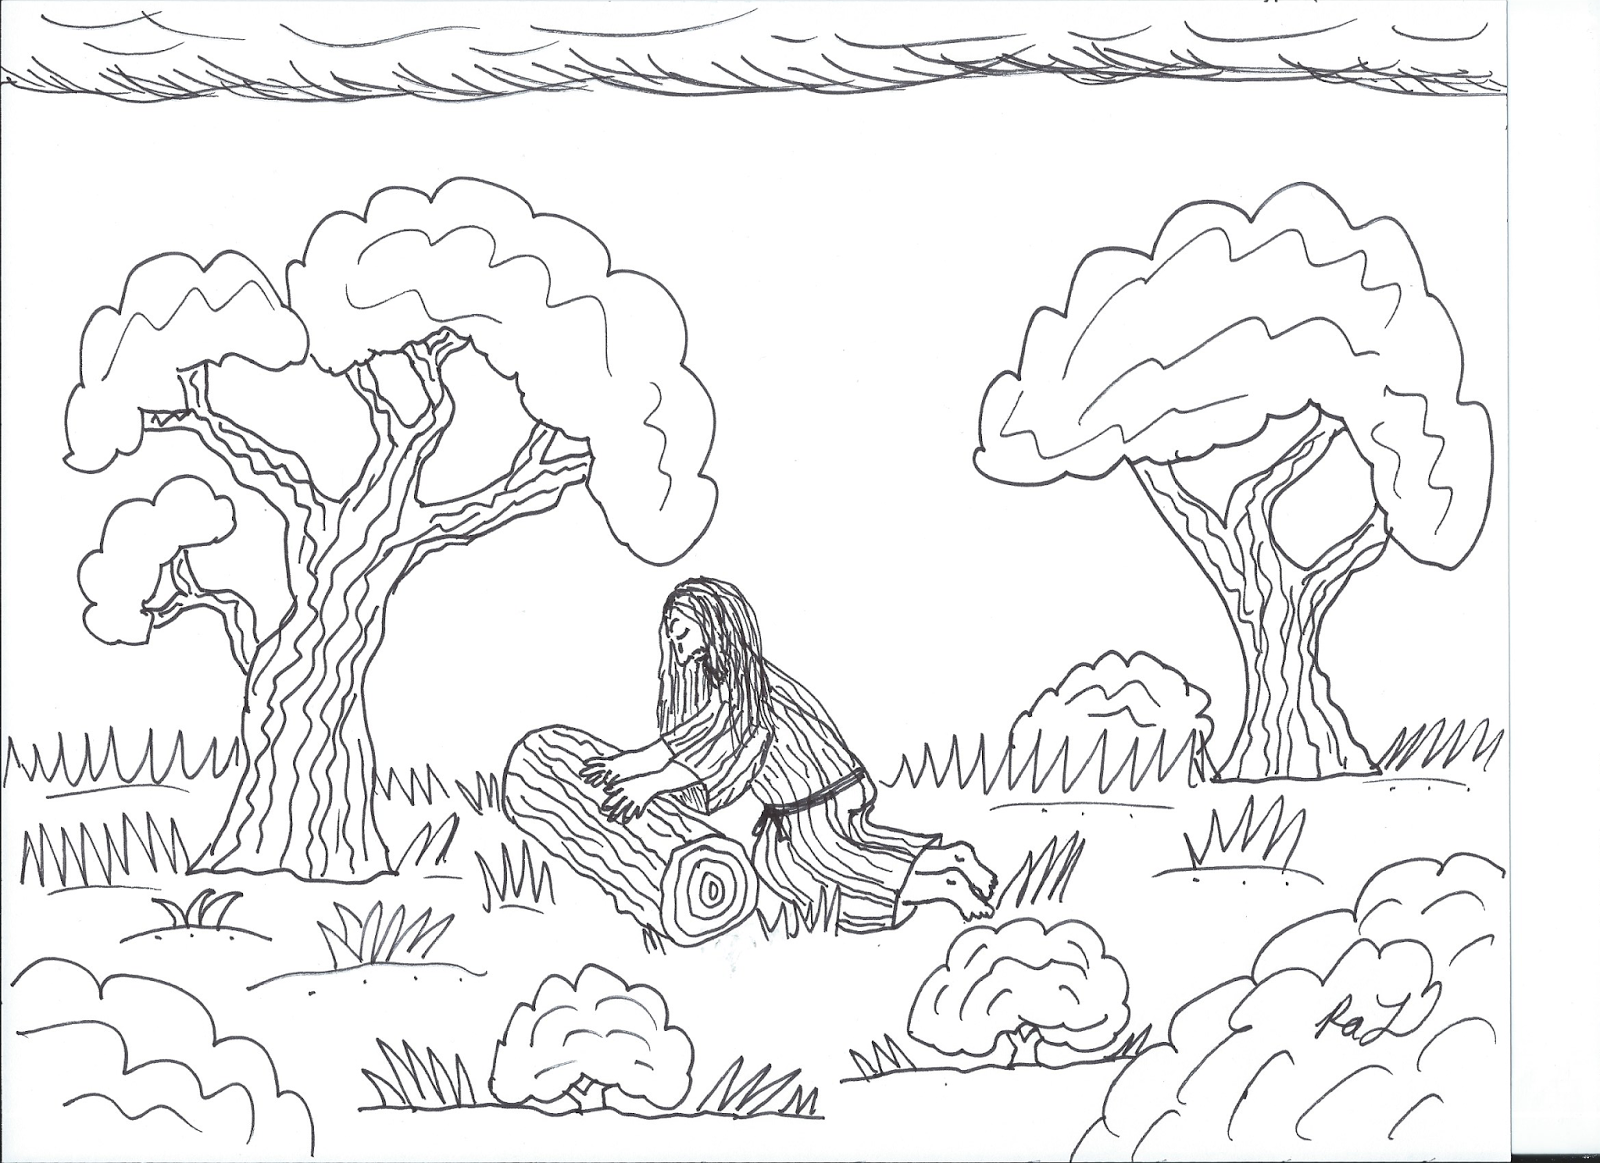 Robin's Great Coloring Pages: Jesus in Garden of Gethsemane